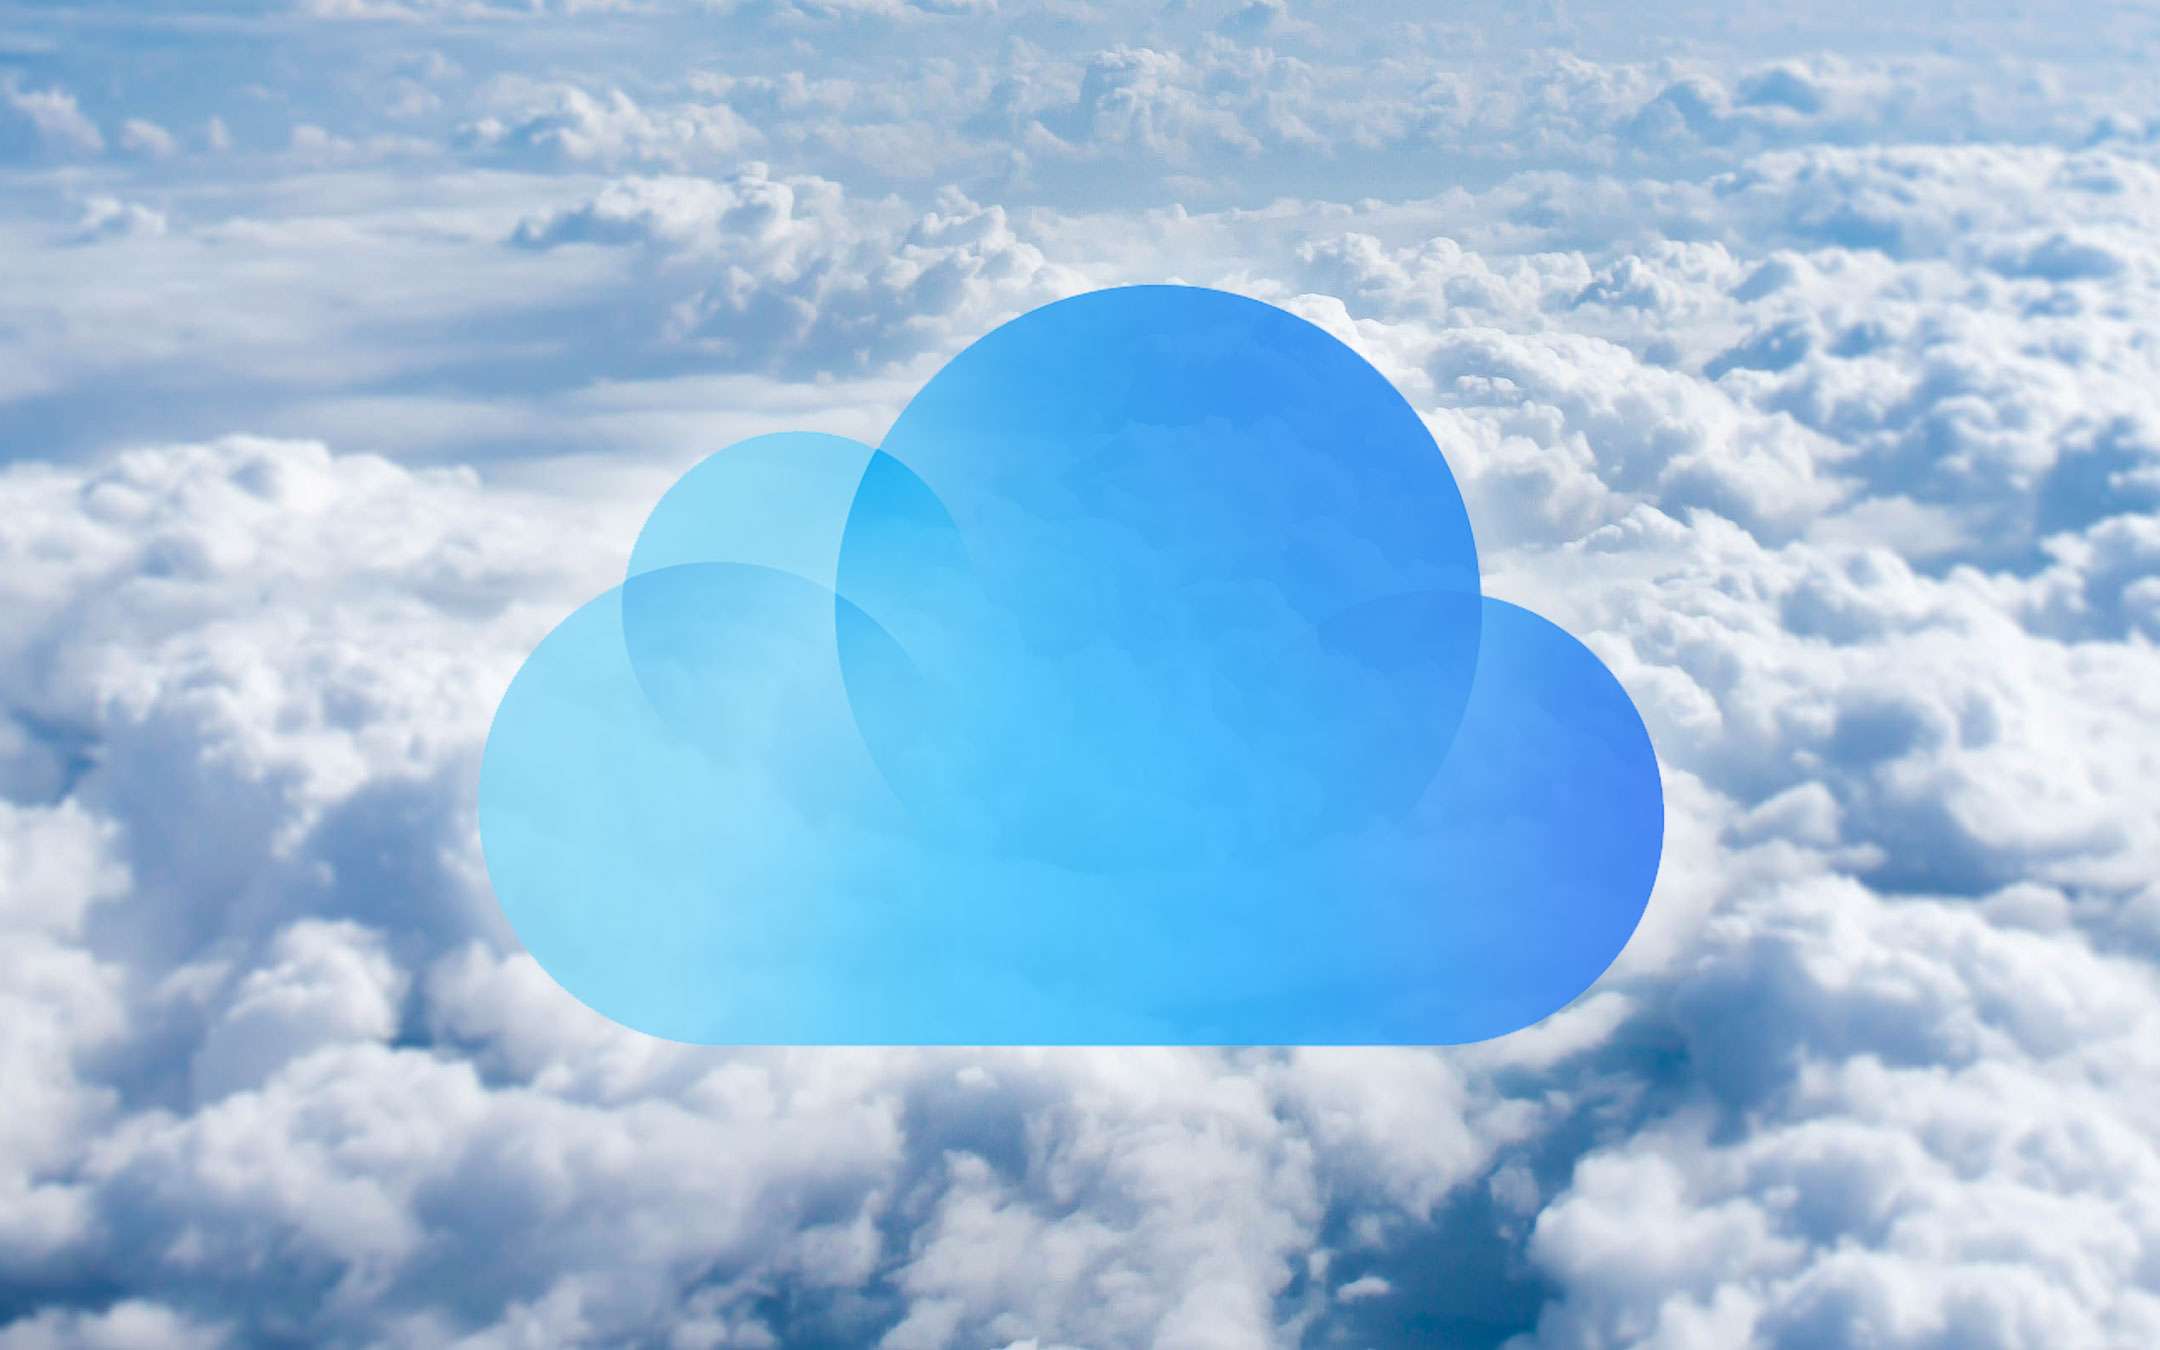 How to choose the cloud that best suits your needs